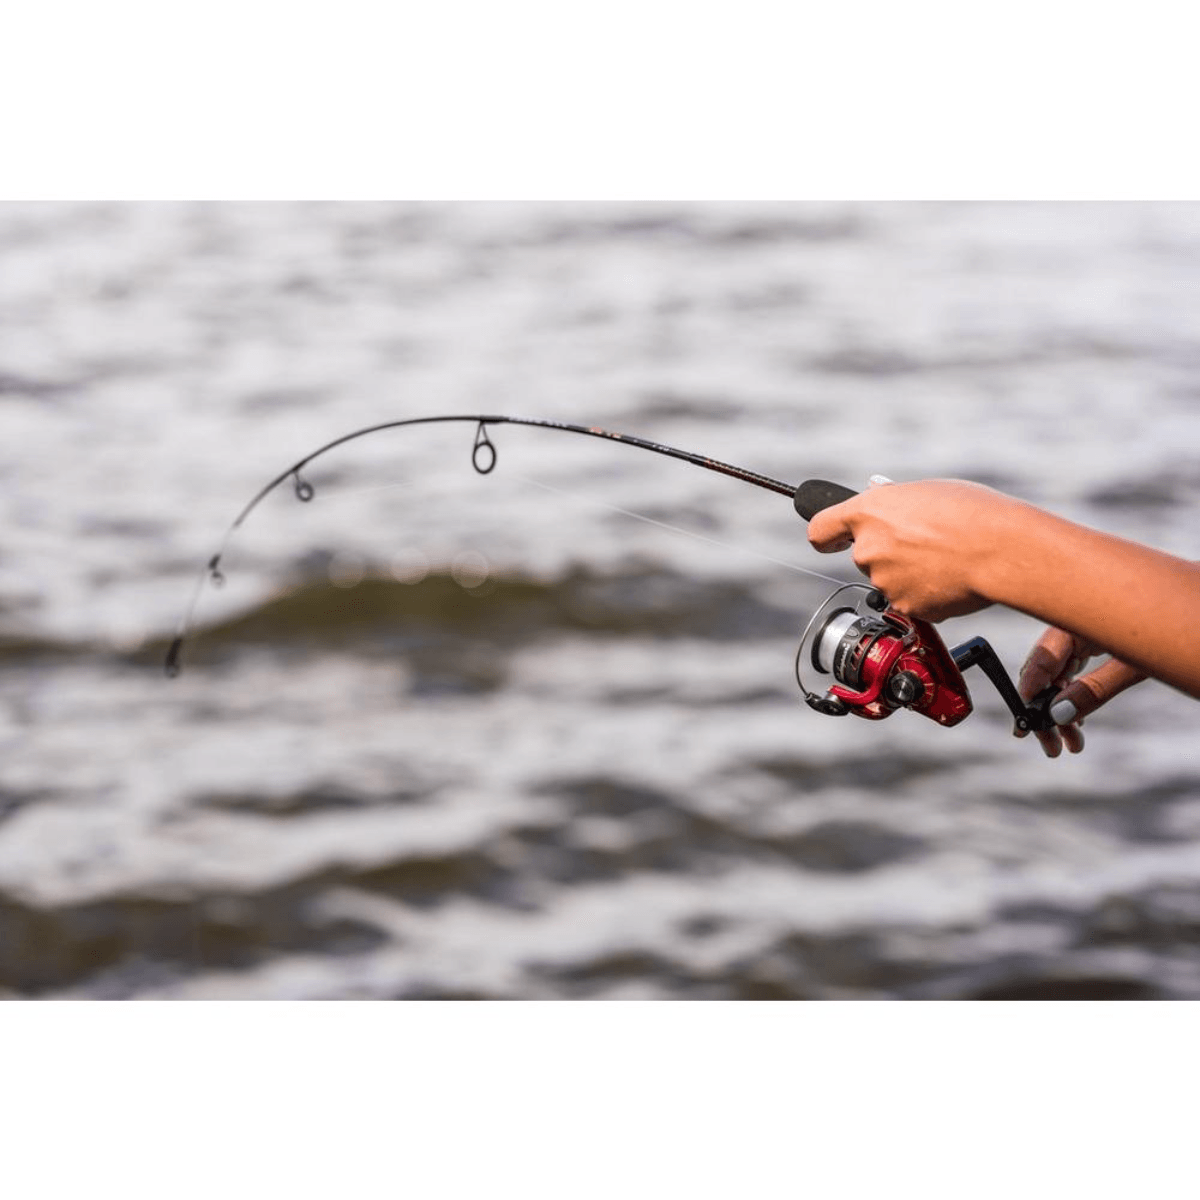 Shakespeare Ugly Stik Dock Runner Spinning Combo Rod - Al's Sporting Goods:  Your One-Stop Shop for Outdoor Sports Gear & Apparel